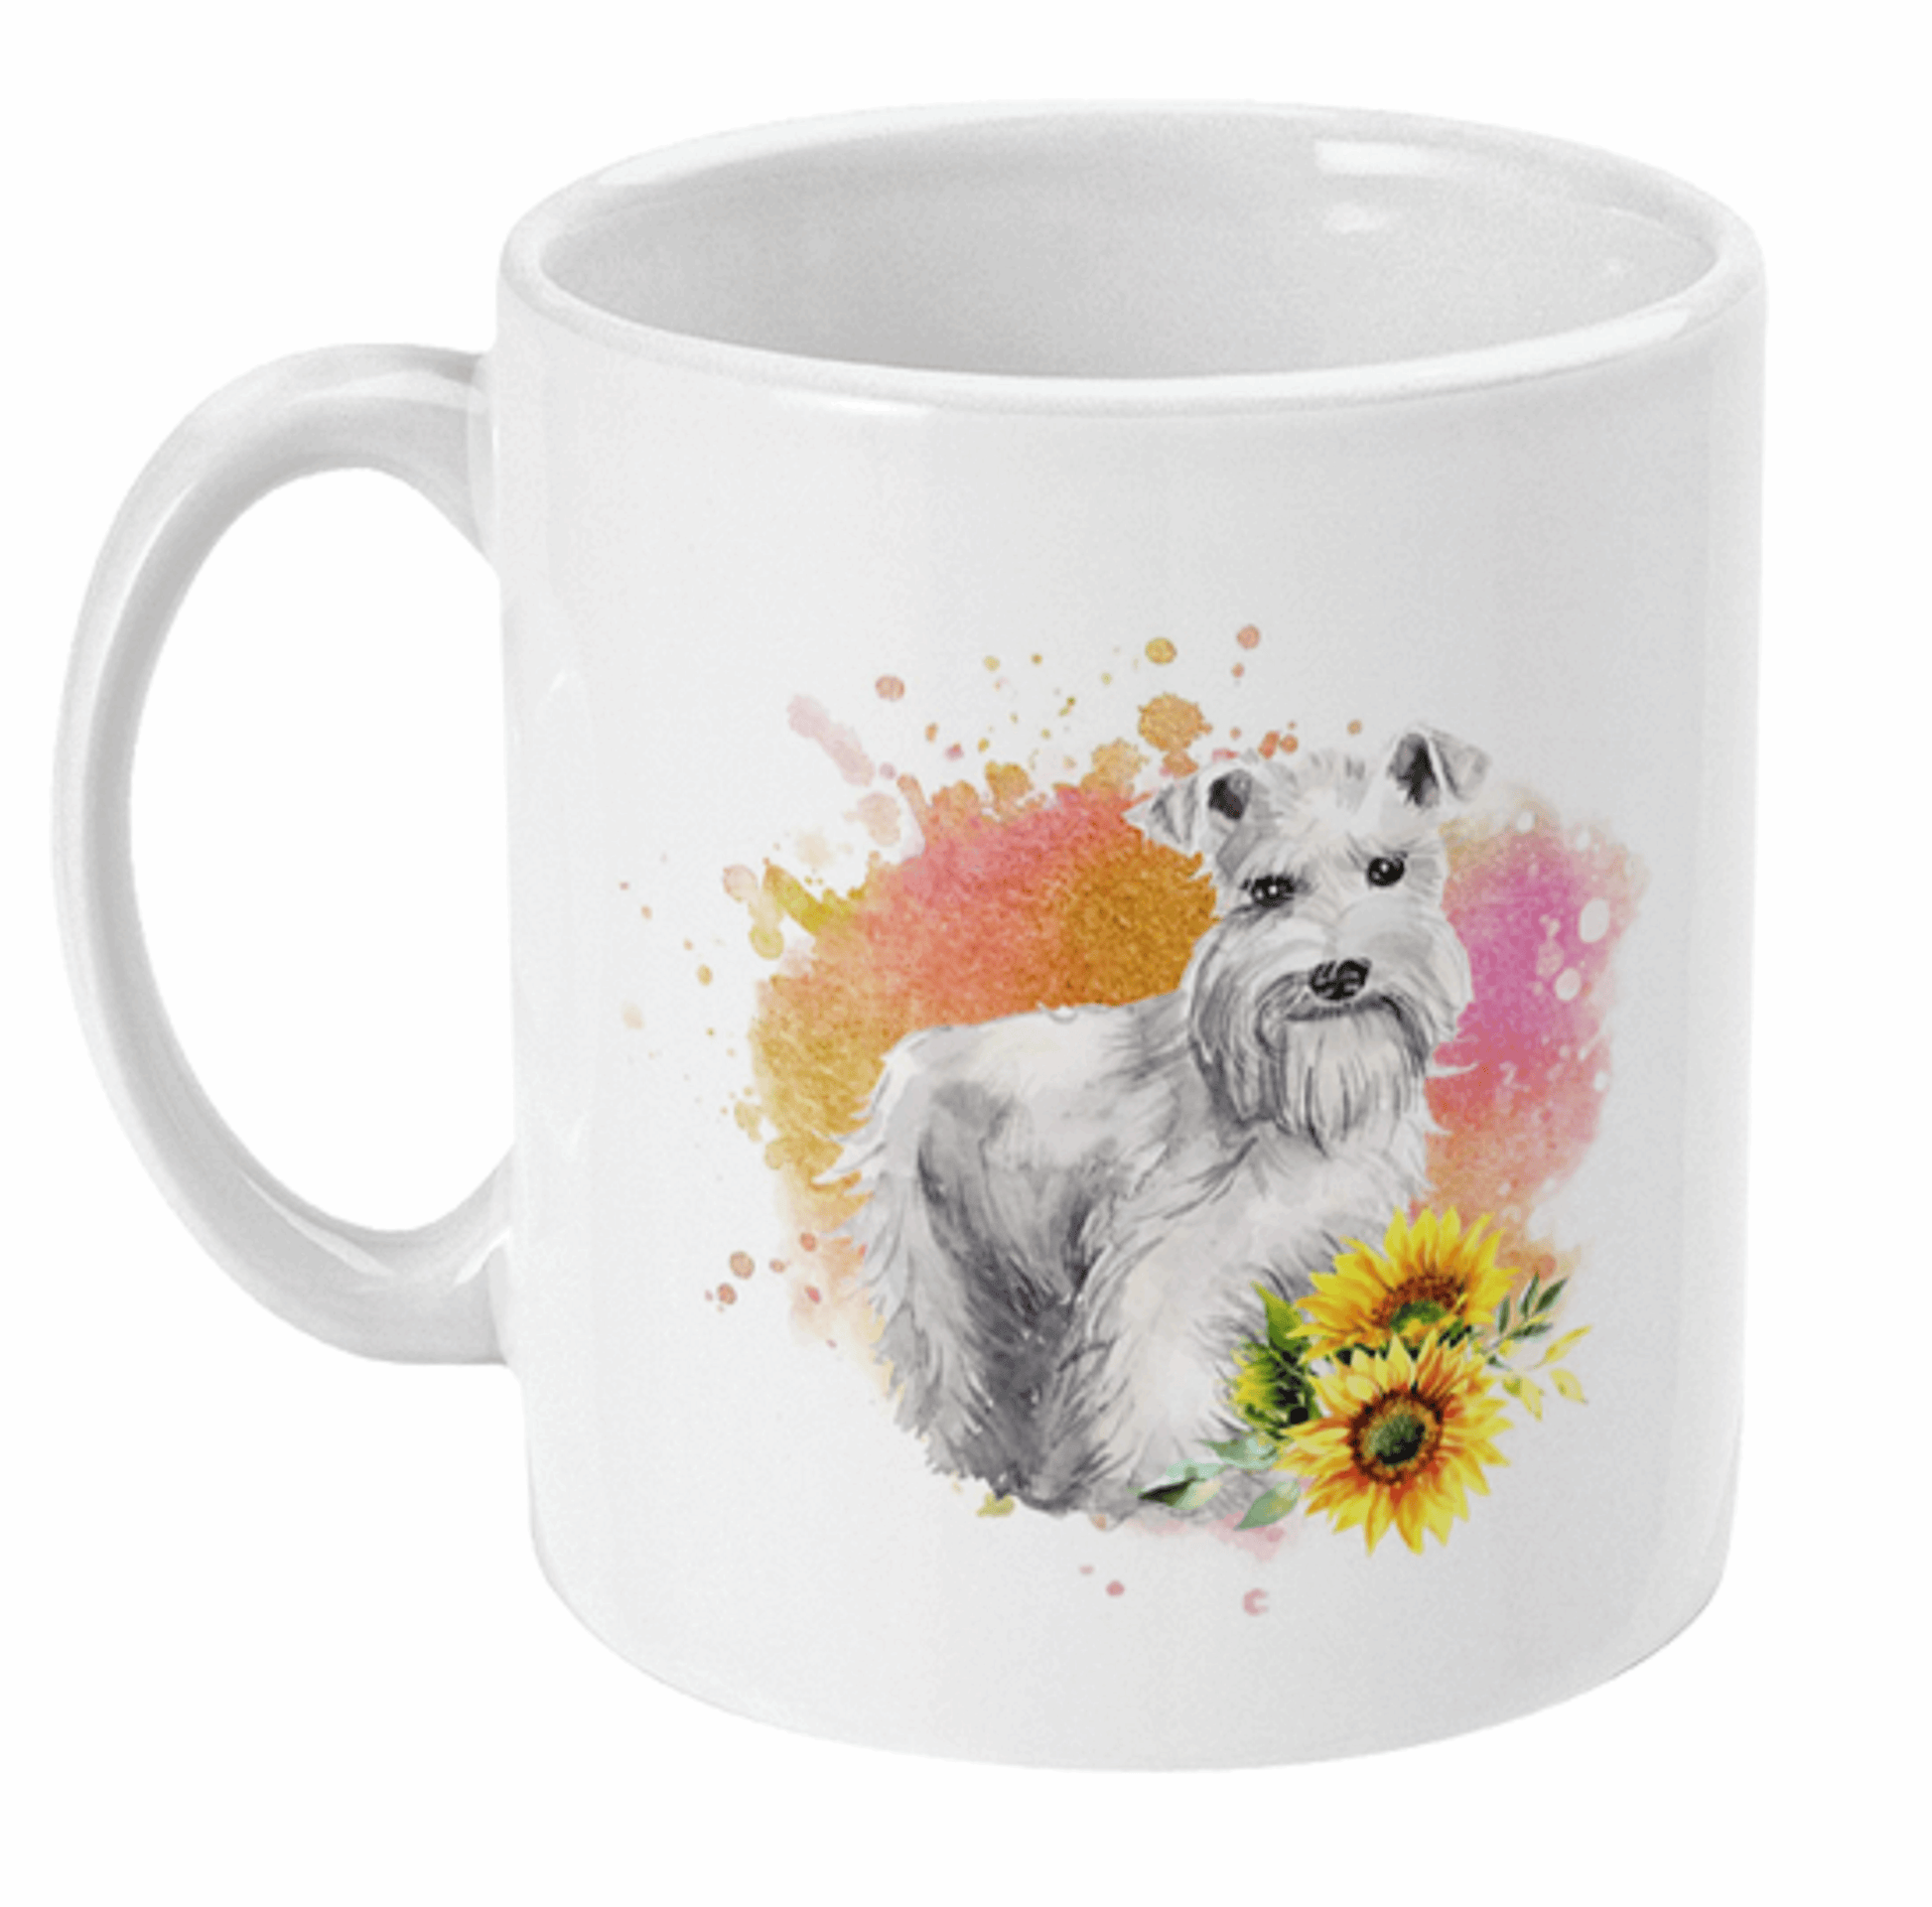  Watercolour Miniature Schnauzer Dog and Flowers Mug by Free Spirit Accessories sold by Free Spirit Accessories